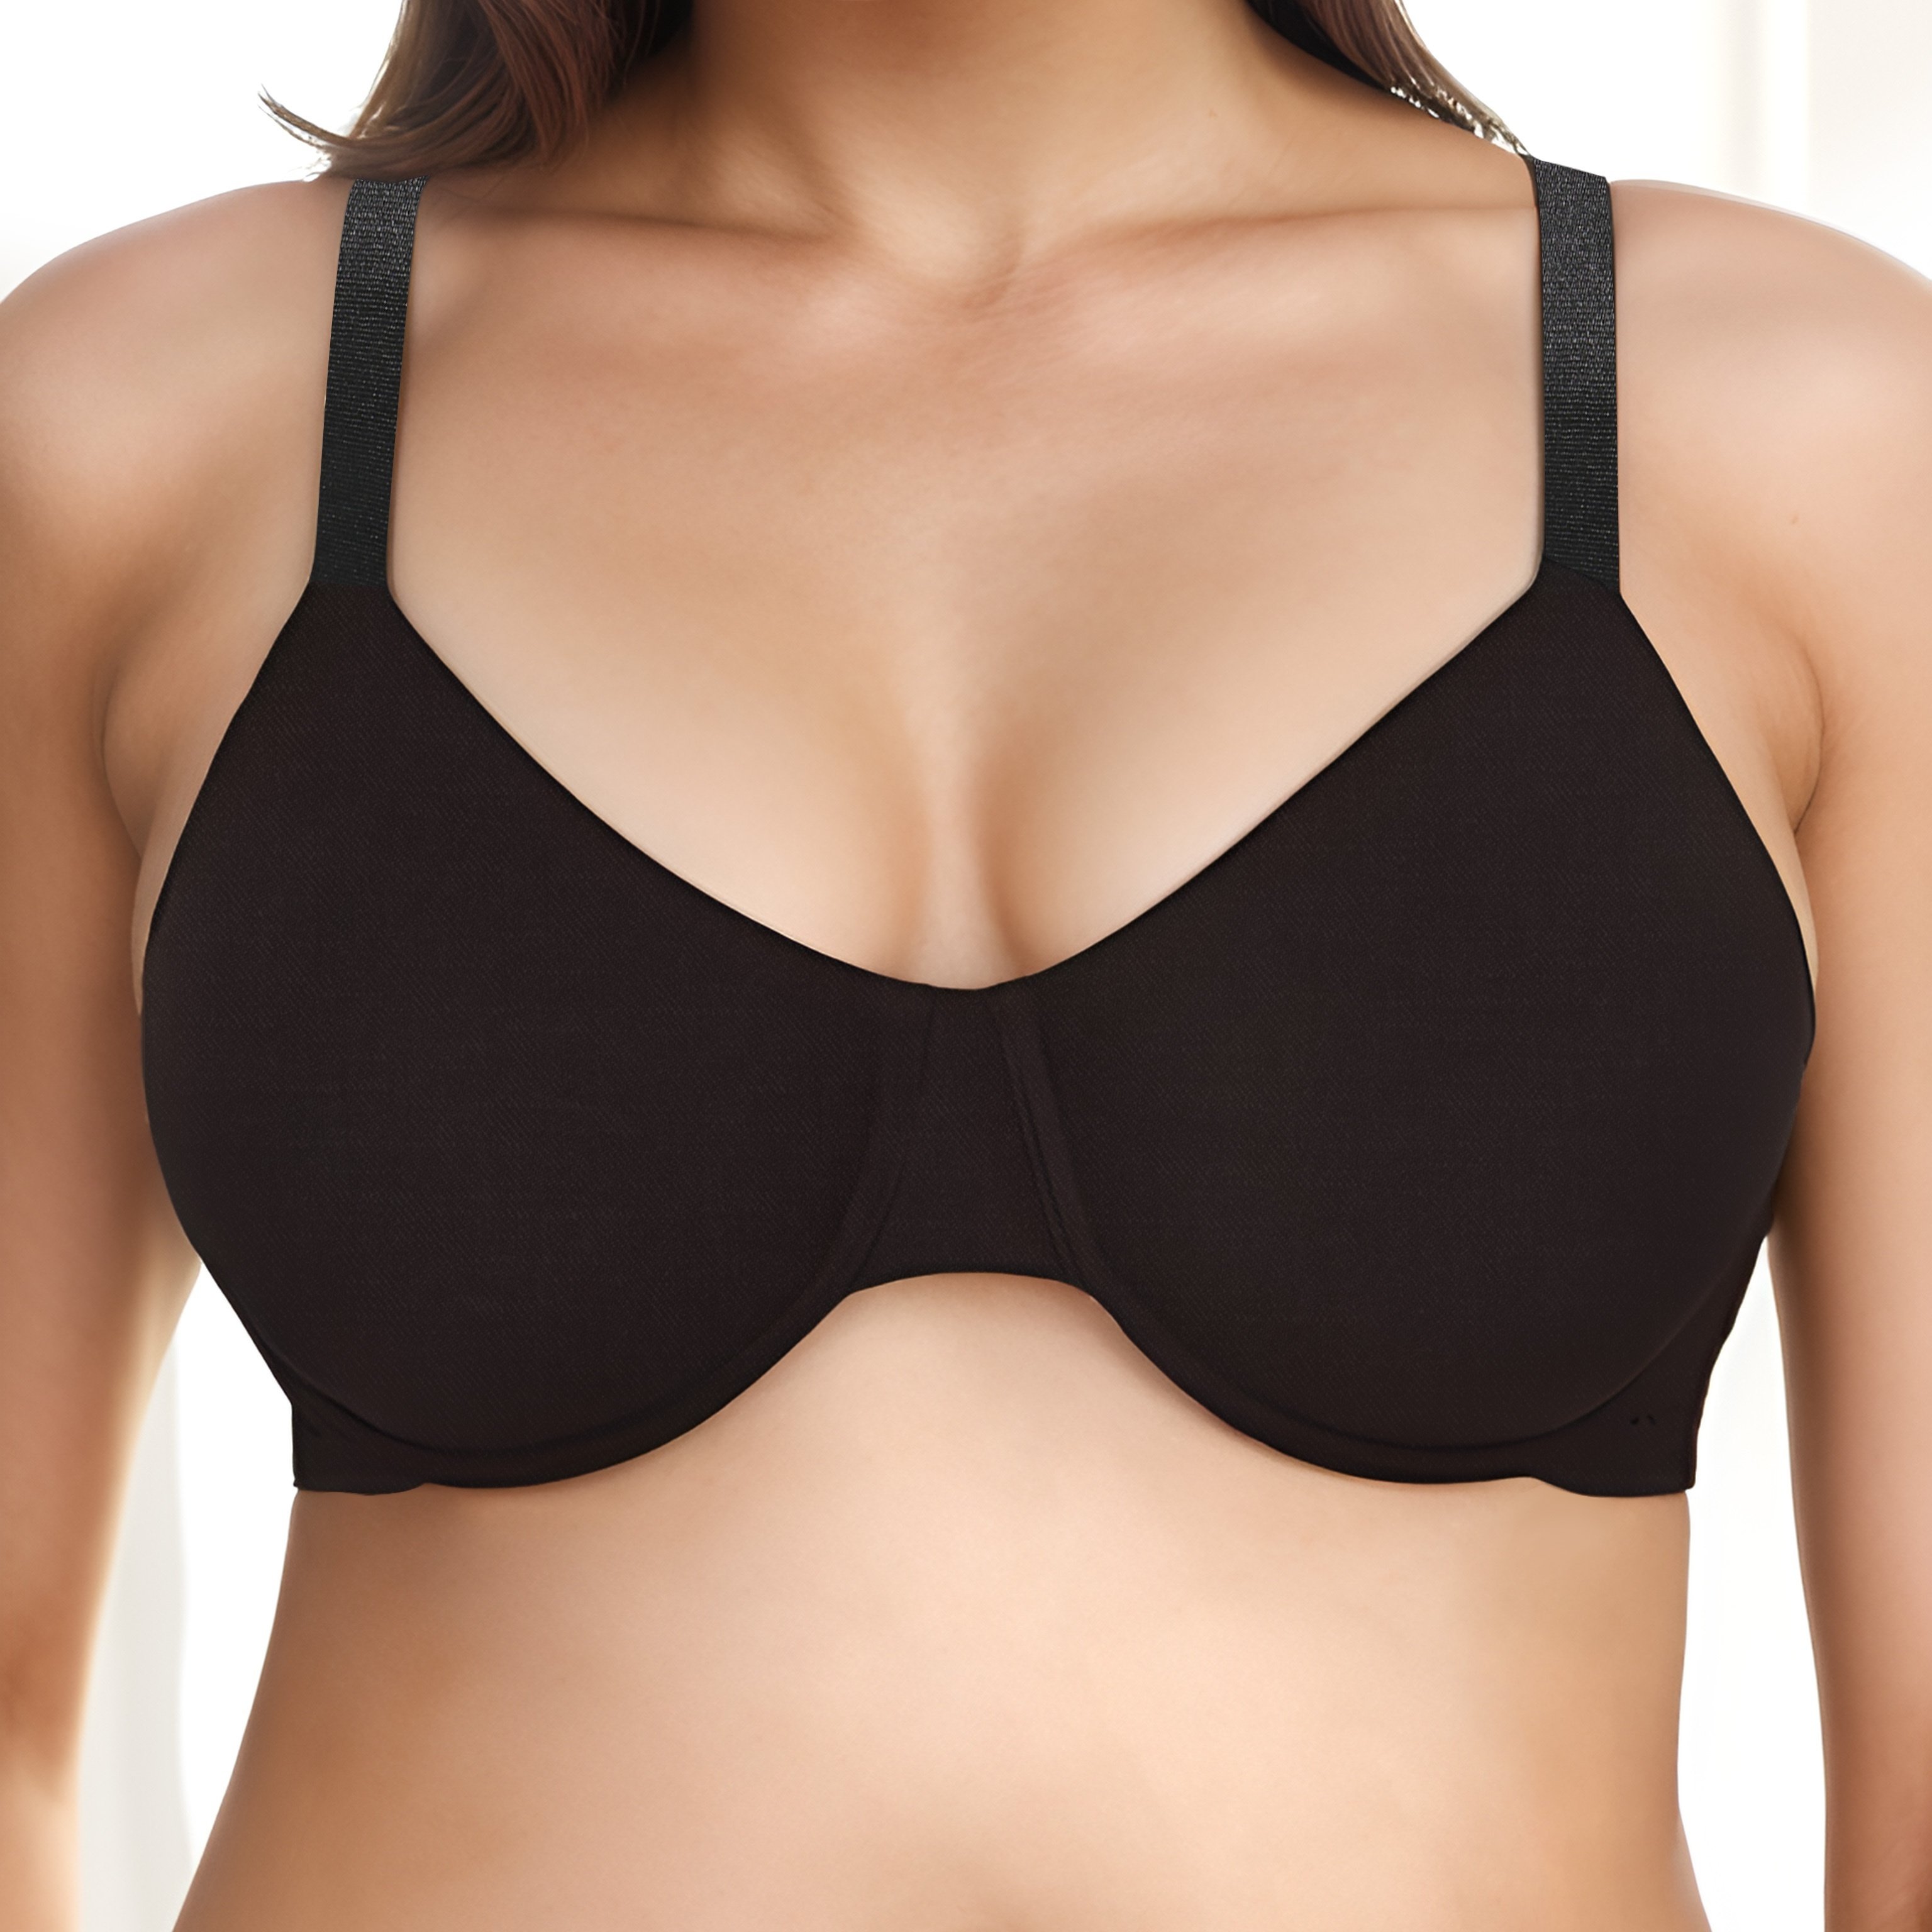 New Bra For Women Round-neck Brassiere Solid Lingerie Comfortable